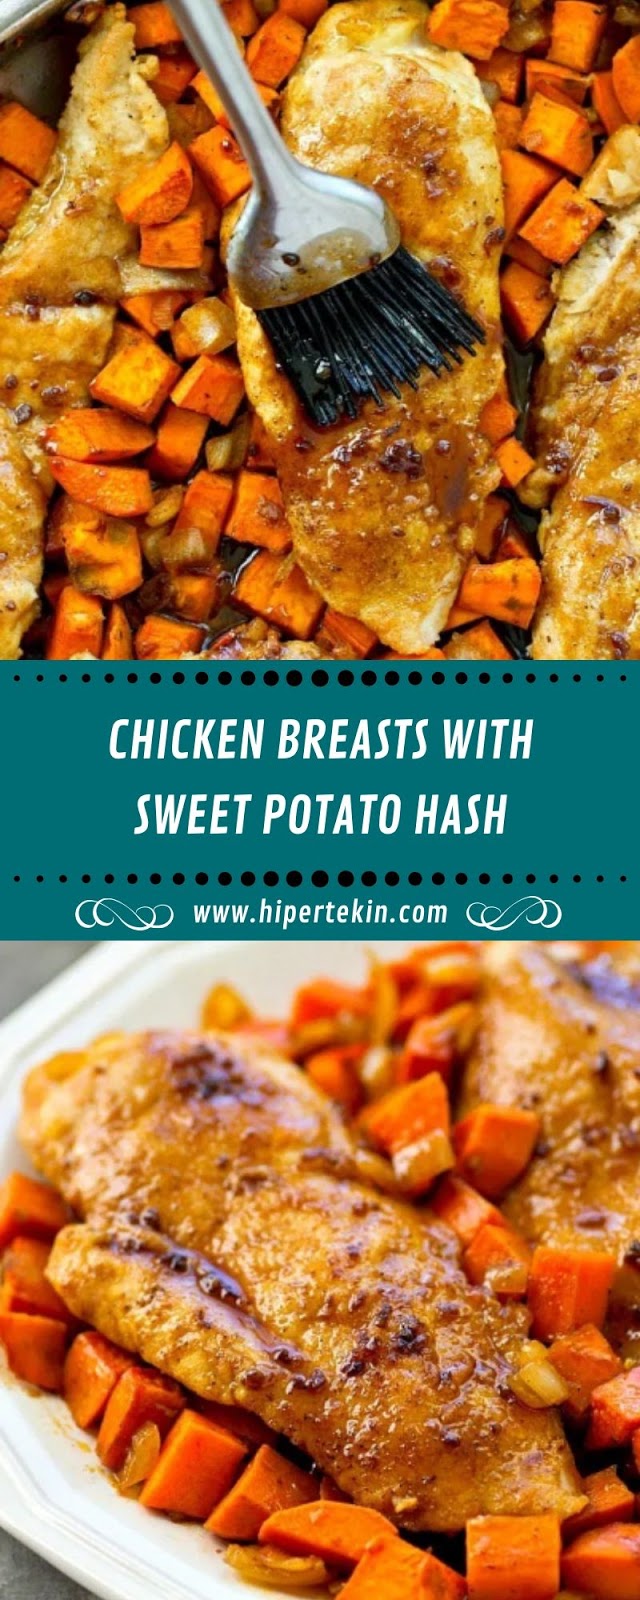 CHICKEN BREASTS WITH SWEET POTATO HASH